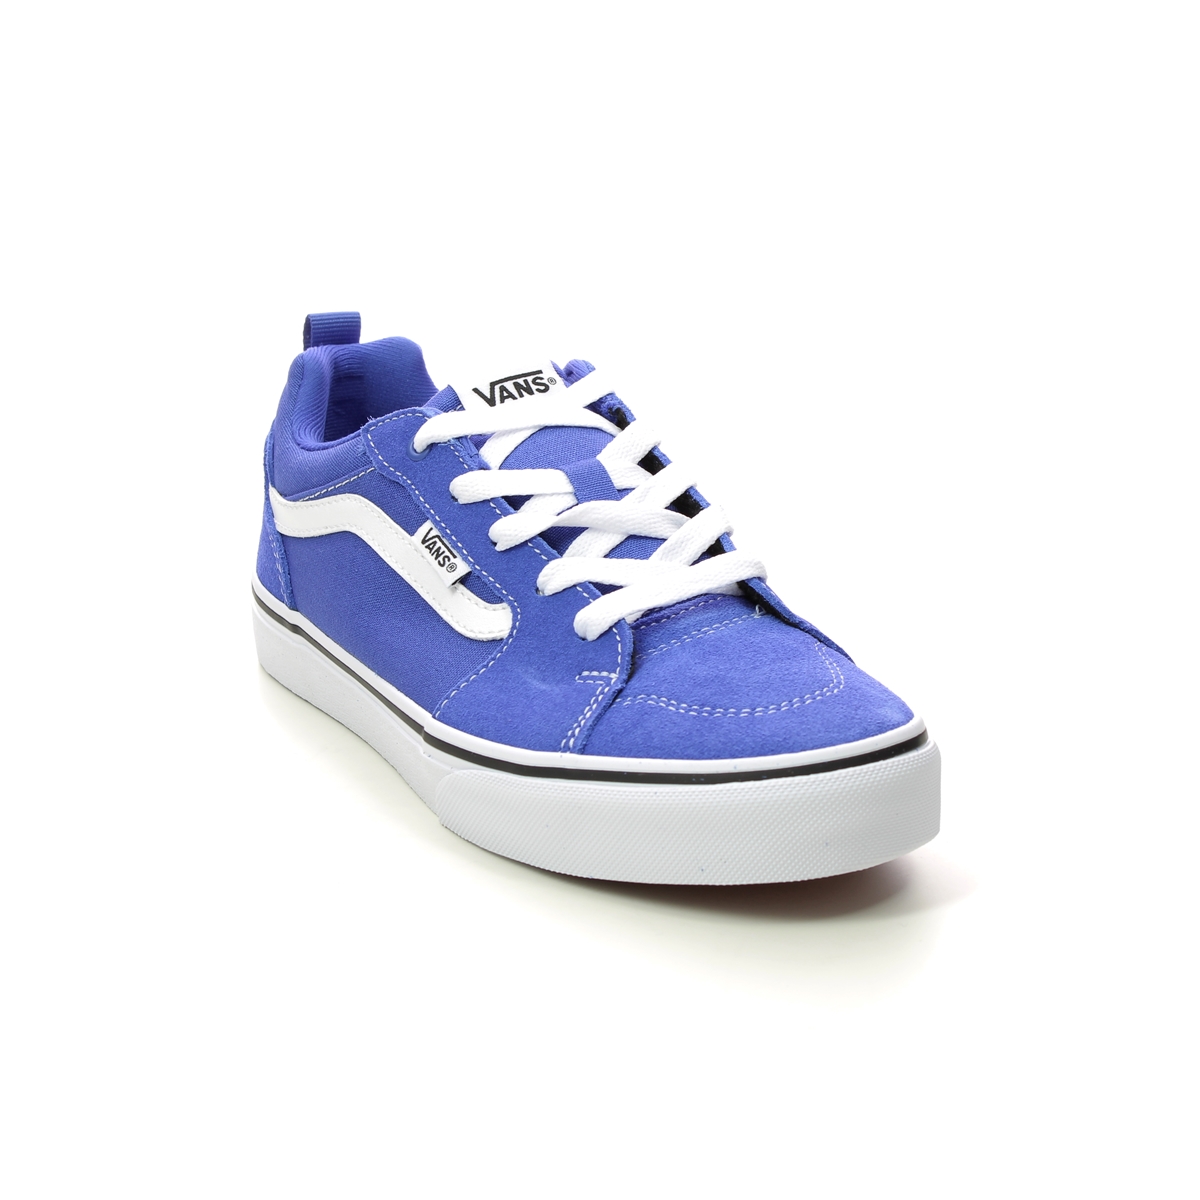 Vans Filmore Youth Blue Kids Trainers  Vn0A3Mvpb-Bt In Size 6 In Plain Blue Vans Boys Trainers For kids